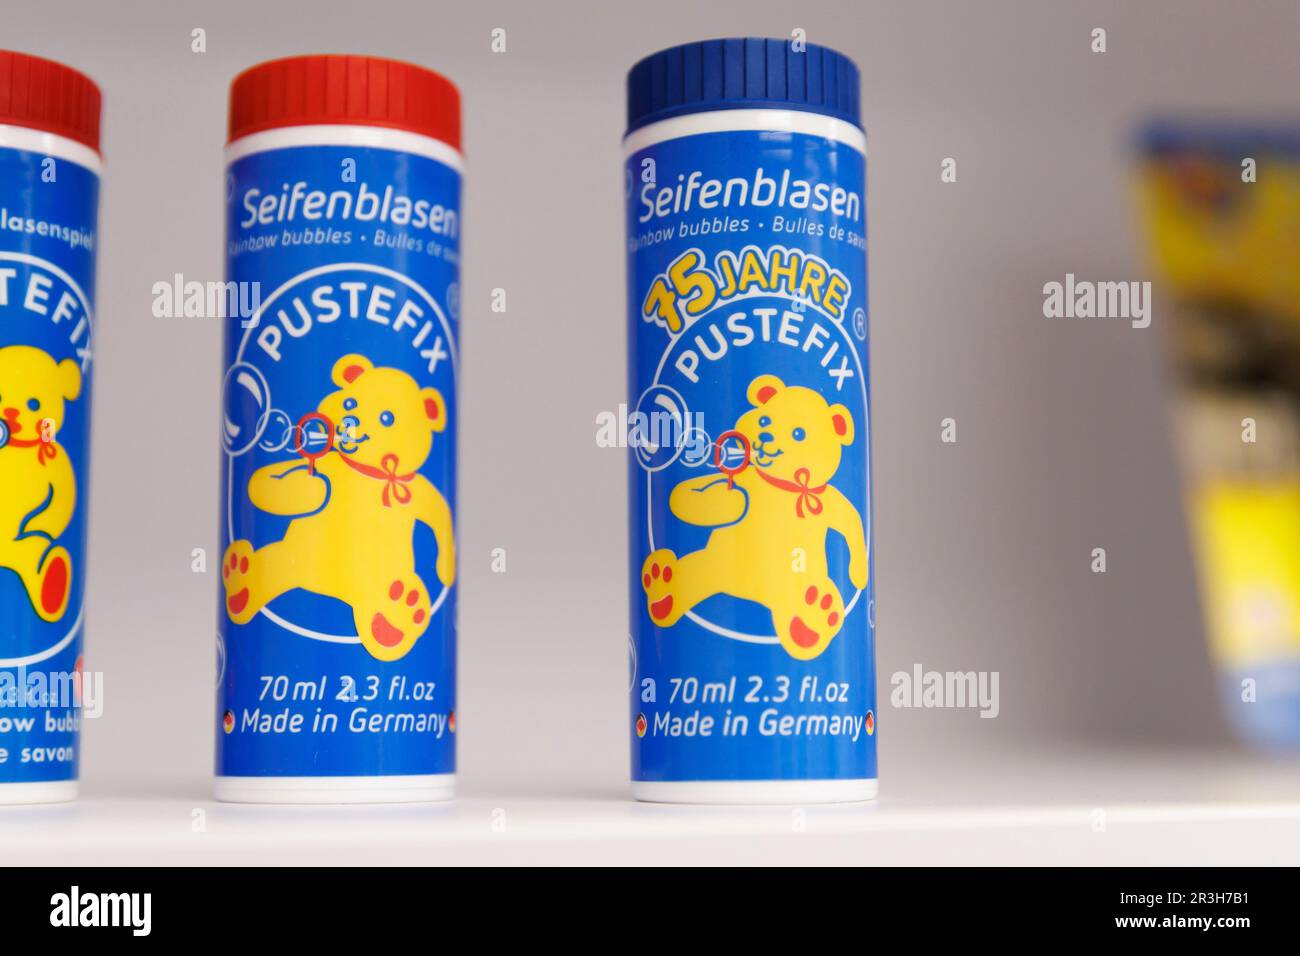 and Pustefix Alamy hi-res - stock images photography